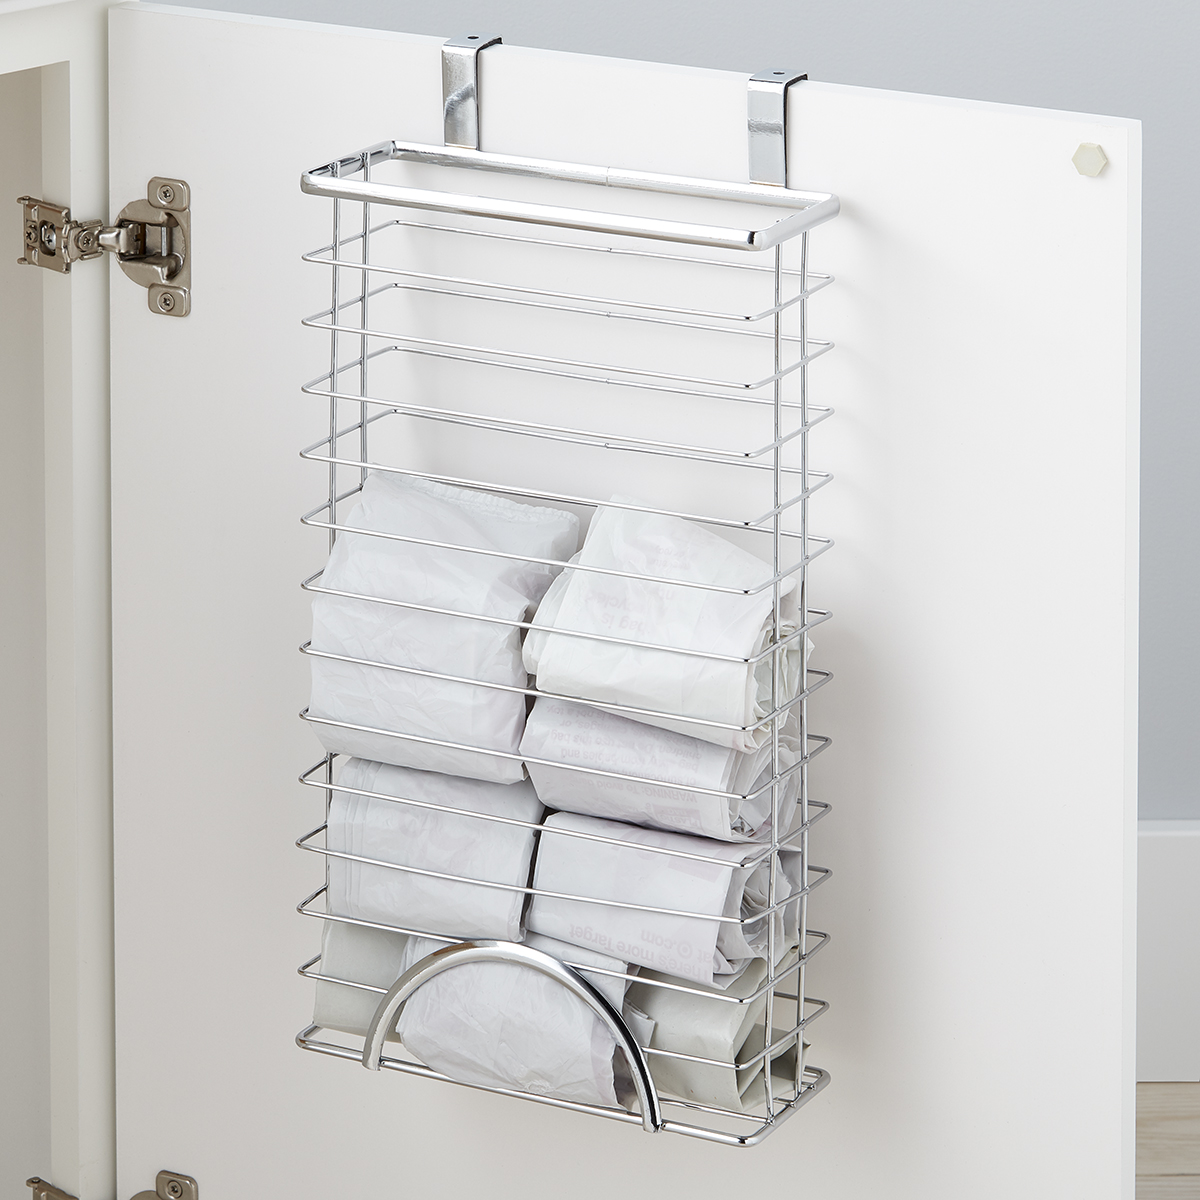 Chrome Over the Cabinet Grocery Bag Holder